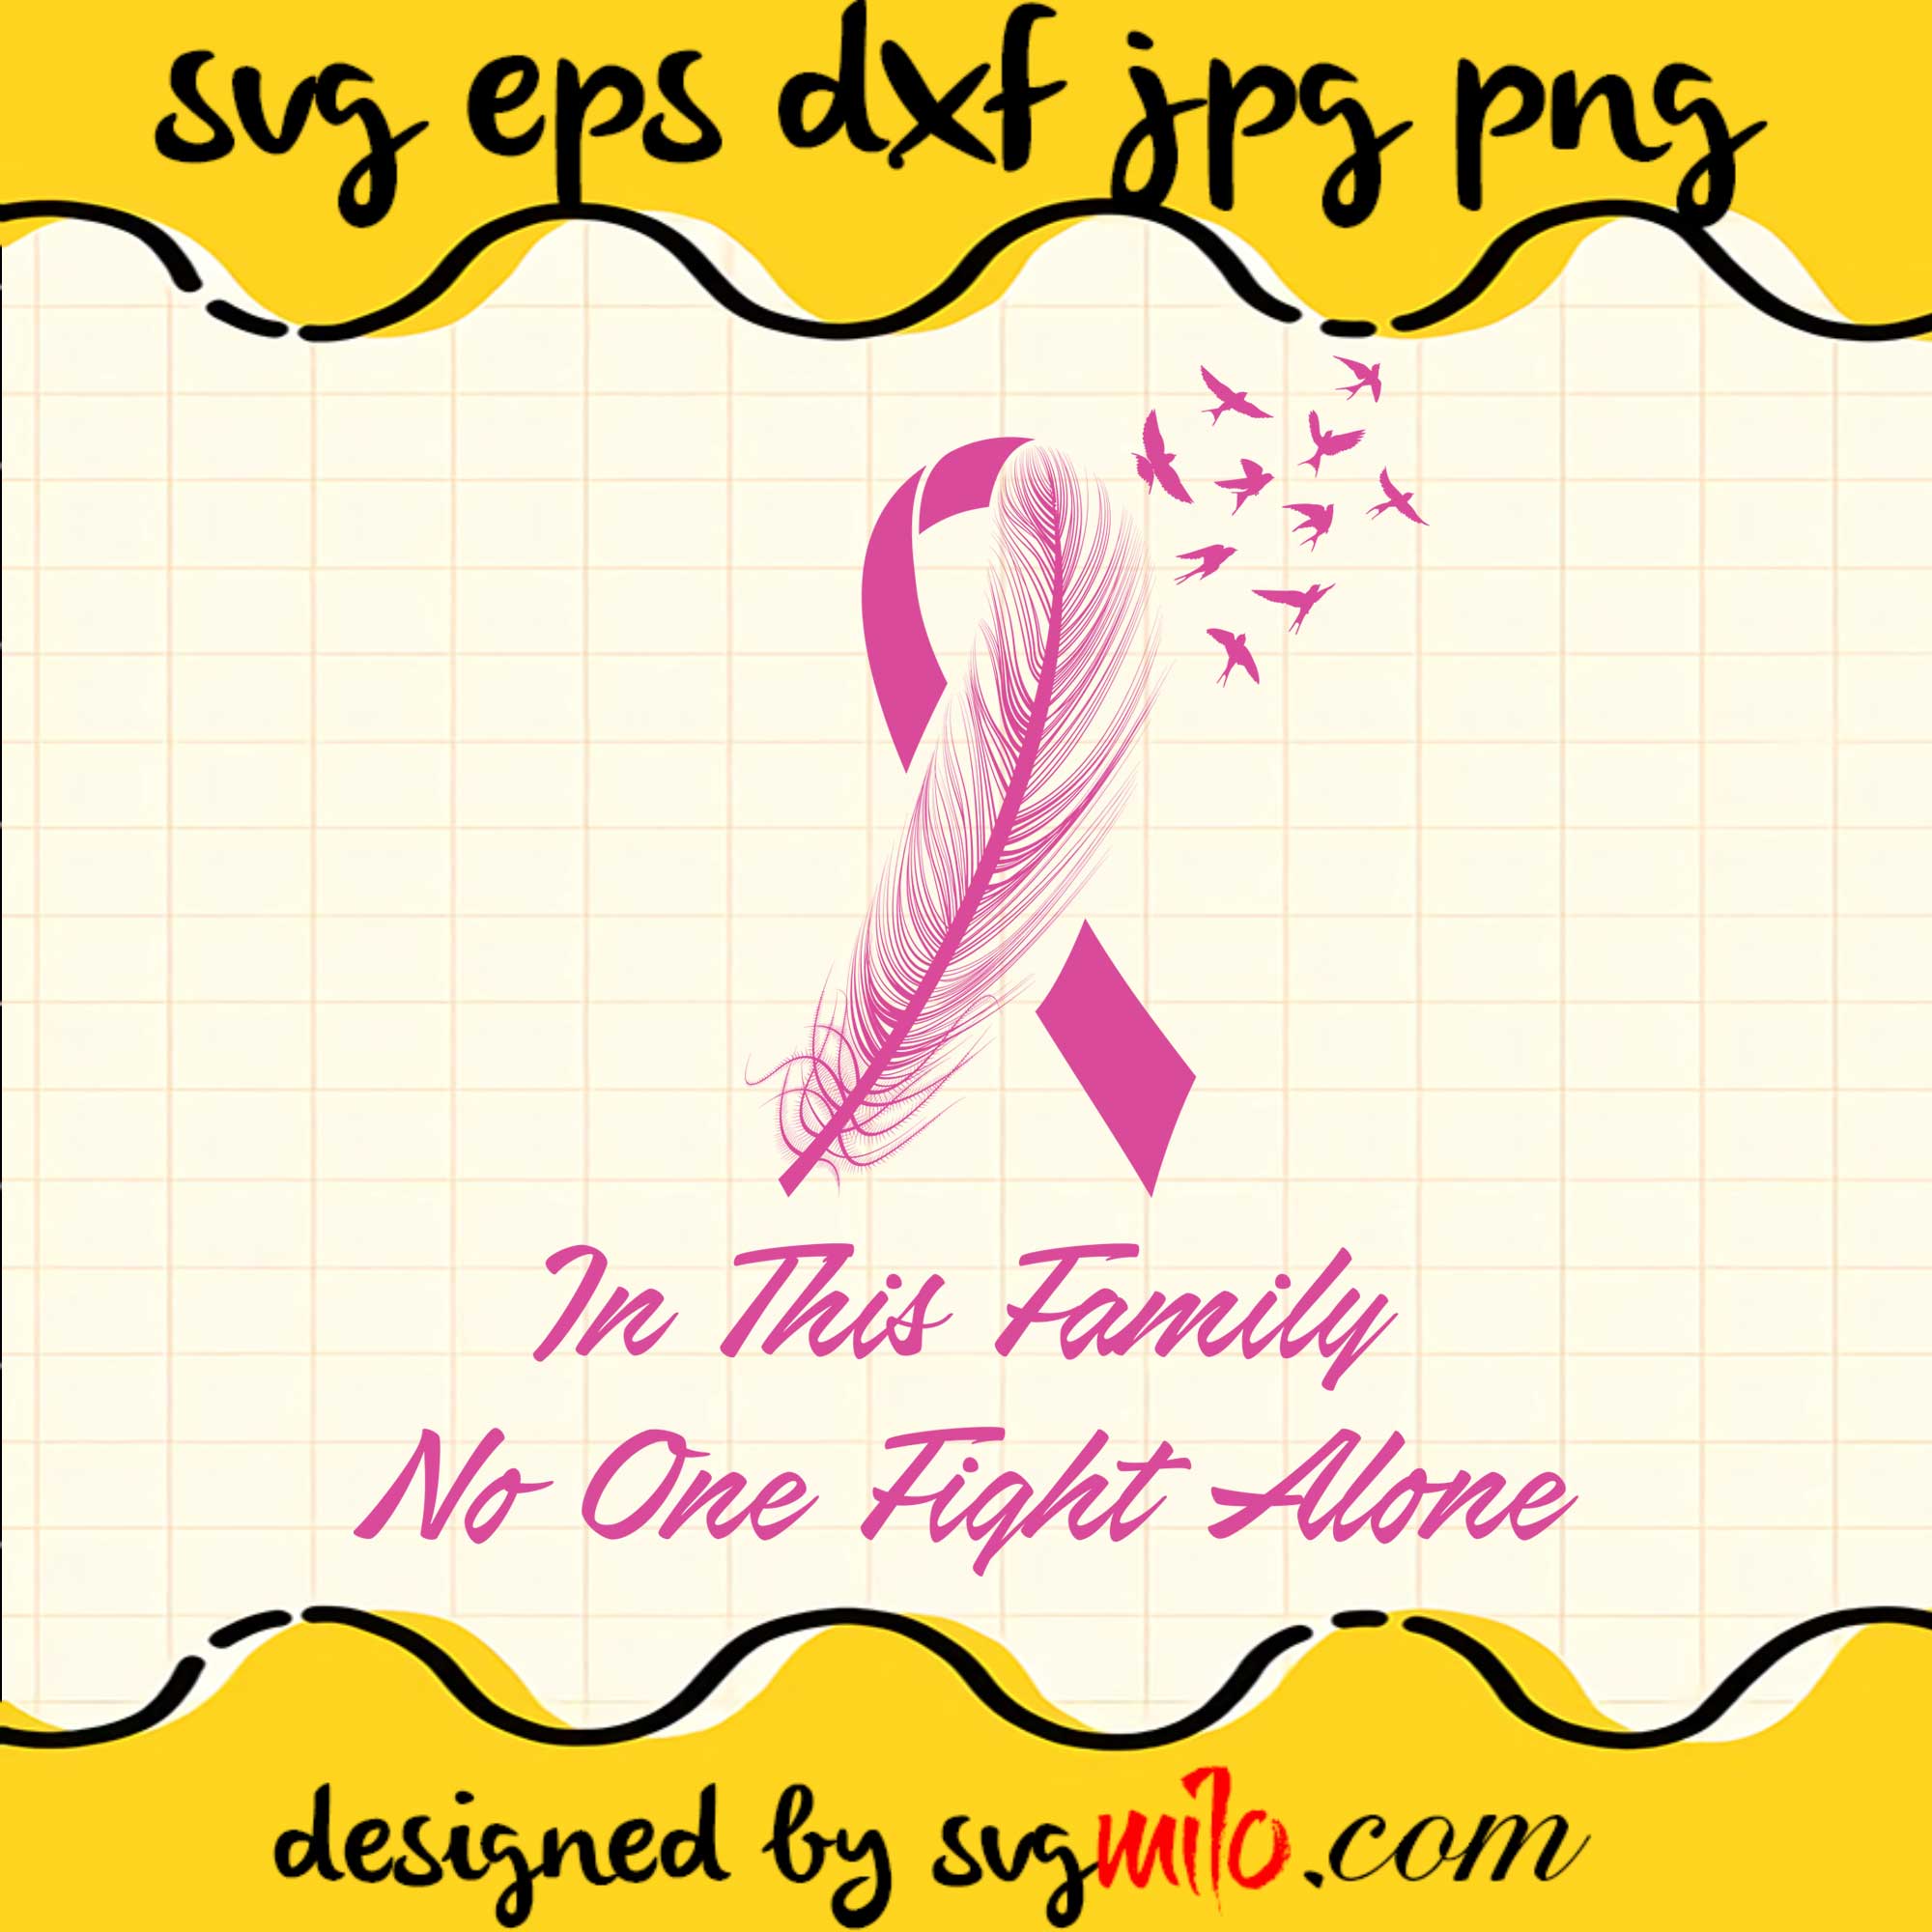 In This Family No One Fight Alone SVG PNG DXF EPS Cut Files For Cricut Silhouette,Premium quality SVG - SVGMILO